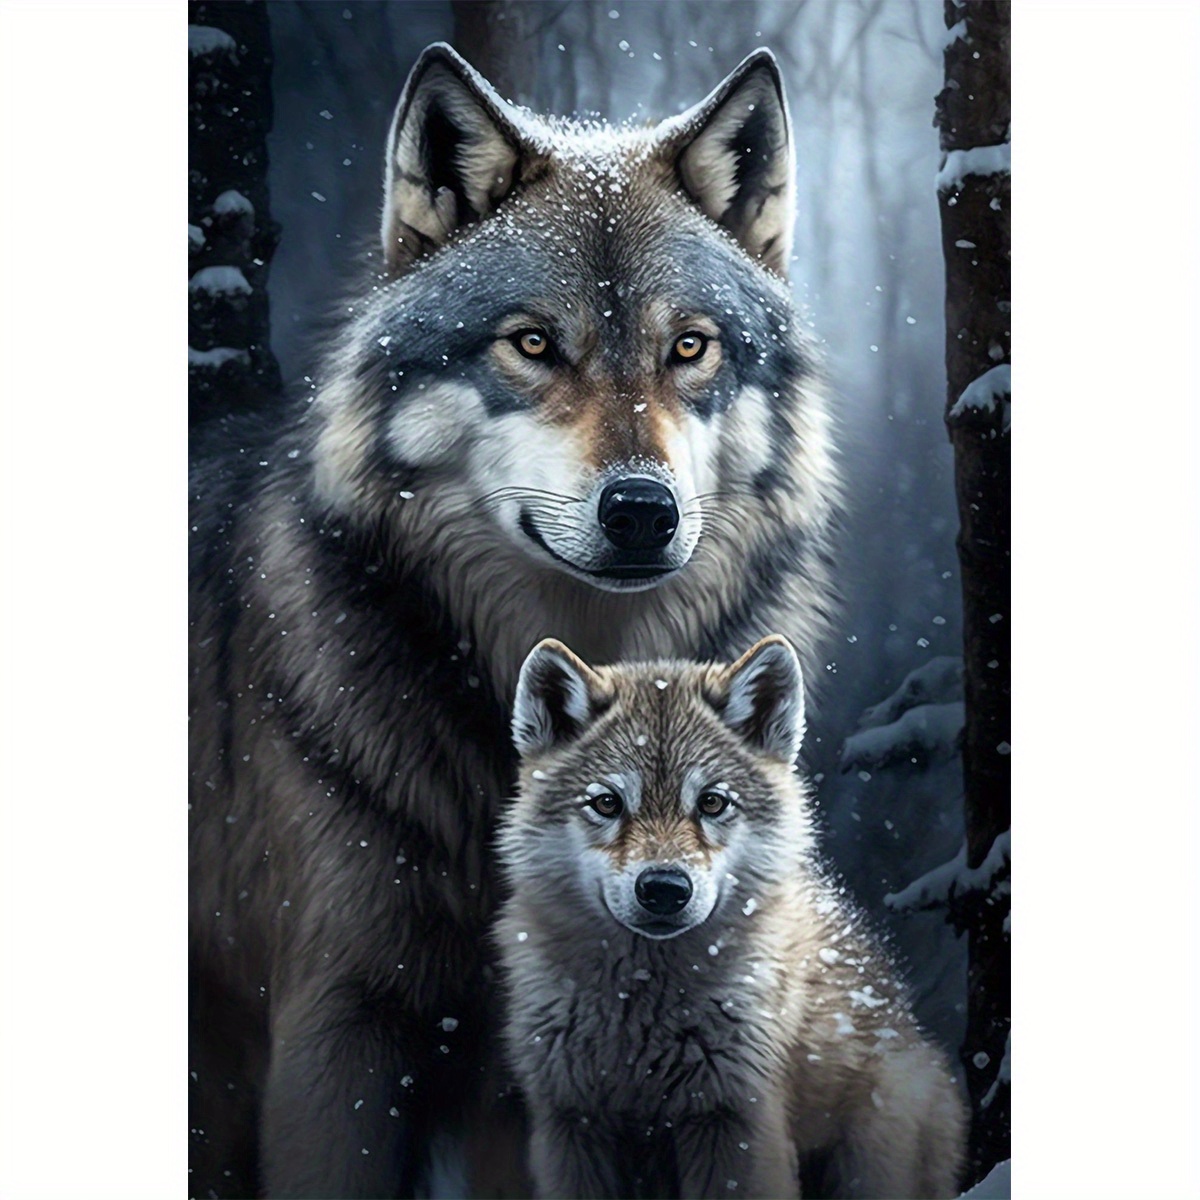 

1pc 5d Diamond Painting Kit For Adults, Wolf Diamond Art Kit For Beginner, Animals Full Round Diamond Painting For Home Wall Decor Gifts, 20x30cm/7.9x11.8inch, Frameless